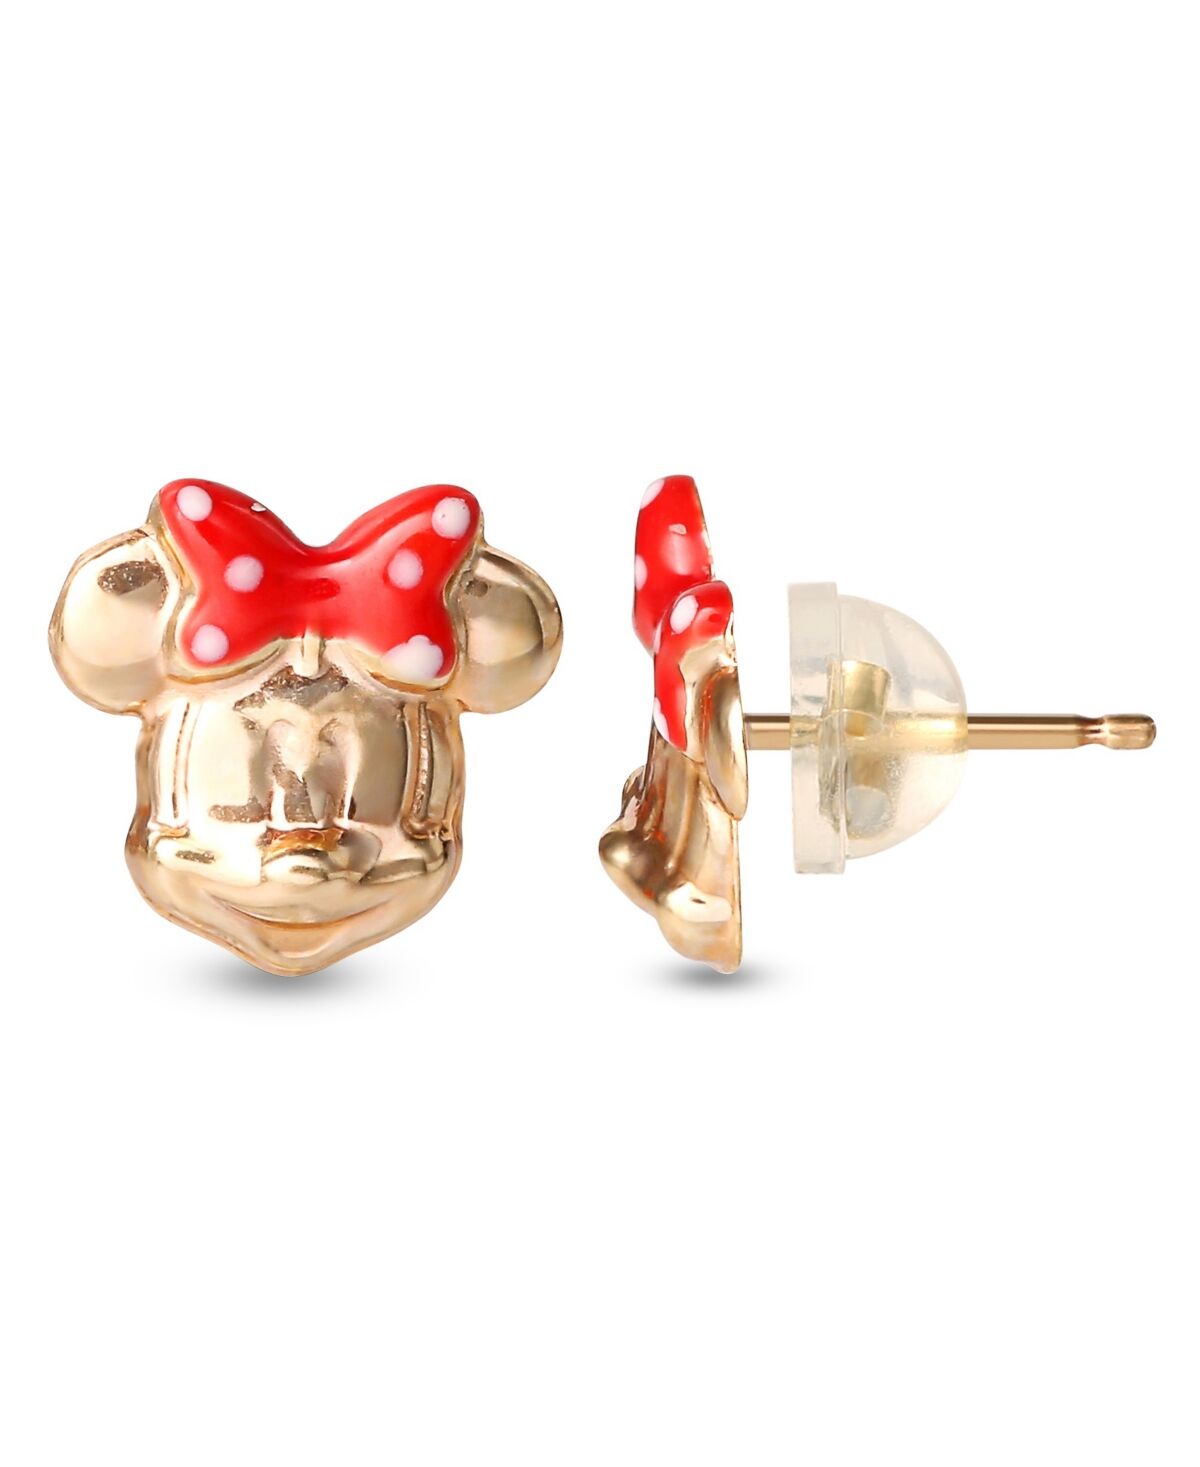 Disney Children's Minnie Mouse Bow Stud Earrings in 14k Gold - Yellow Gold